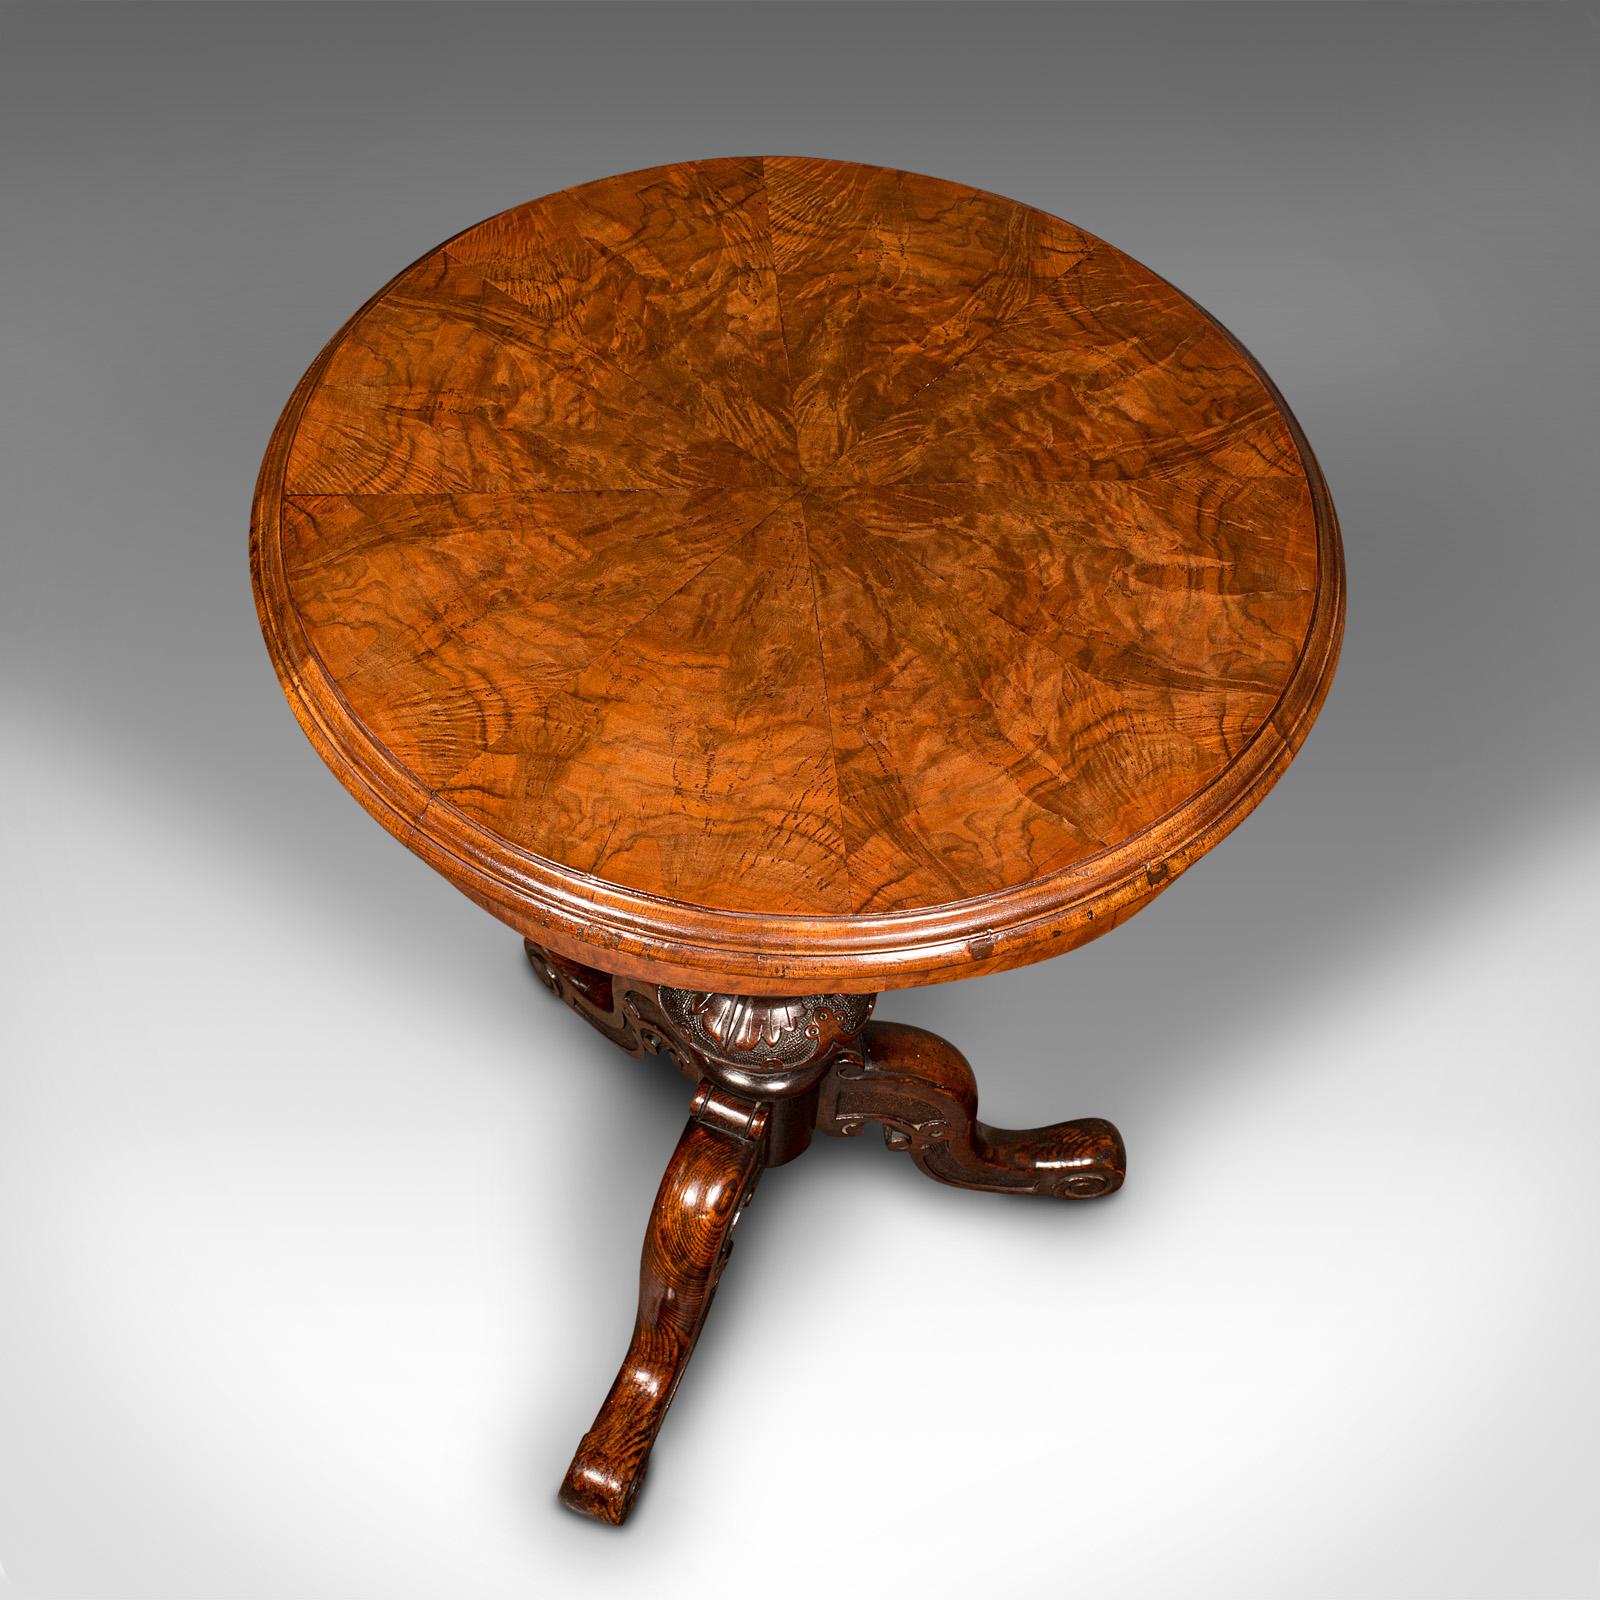 Antique Lamp Table, English Burr Walnut, Decorative, Occasional, Early Victorian For Sale 1